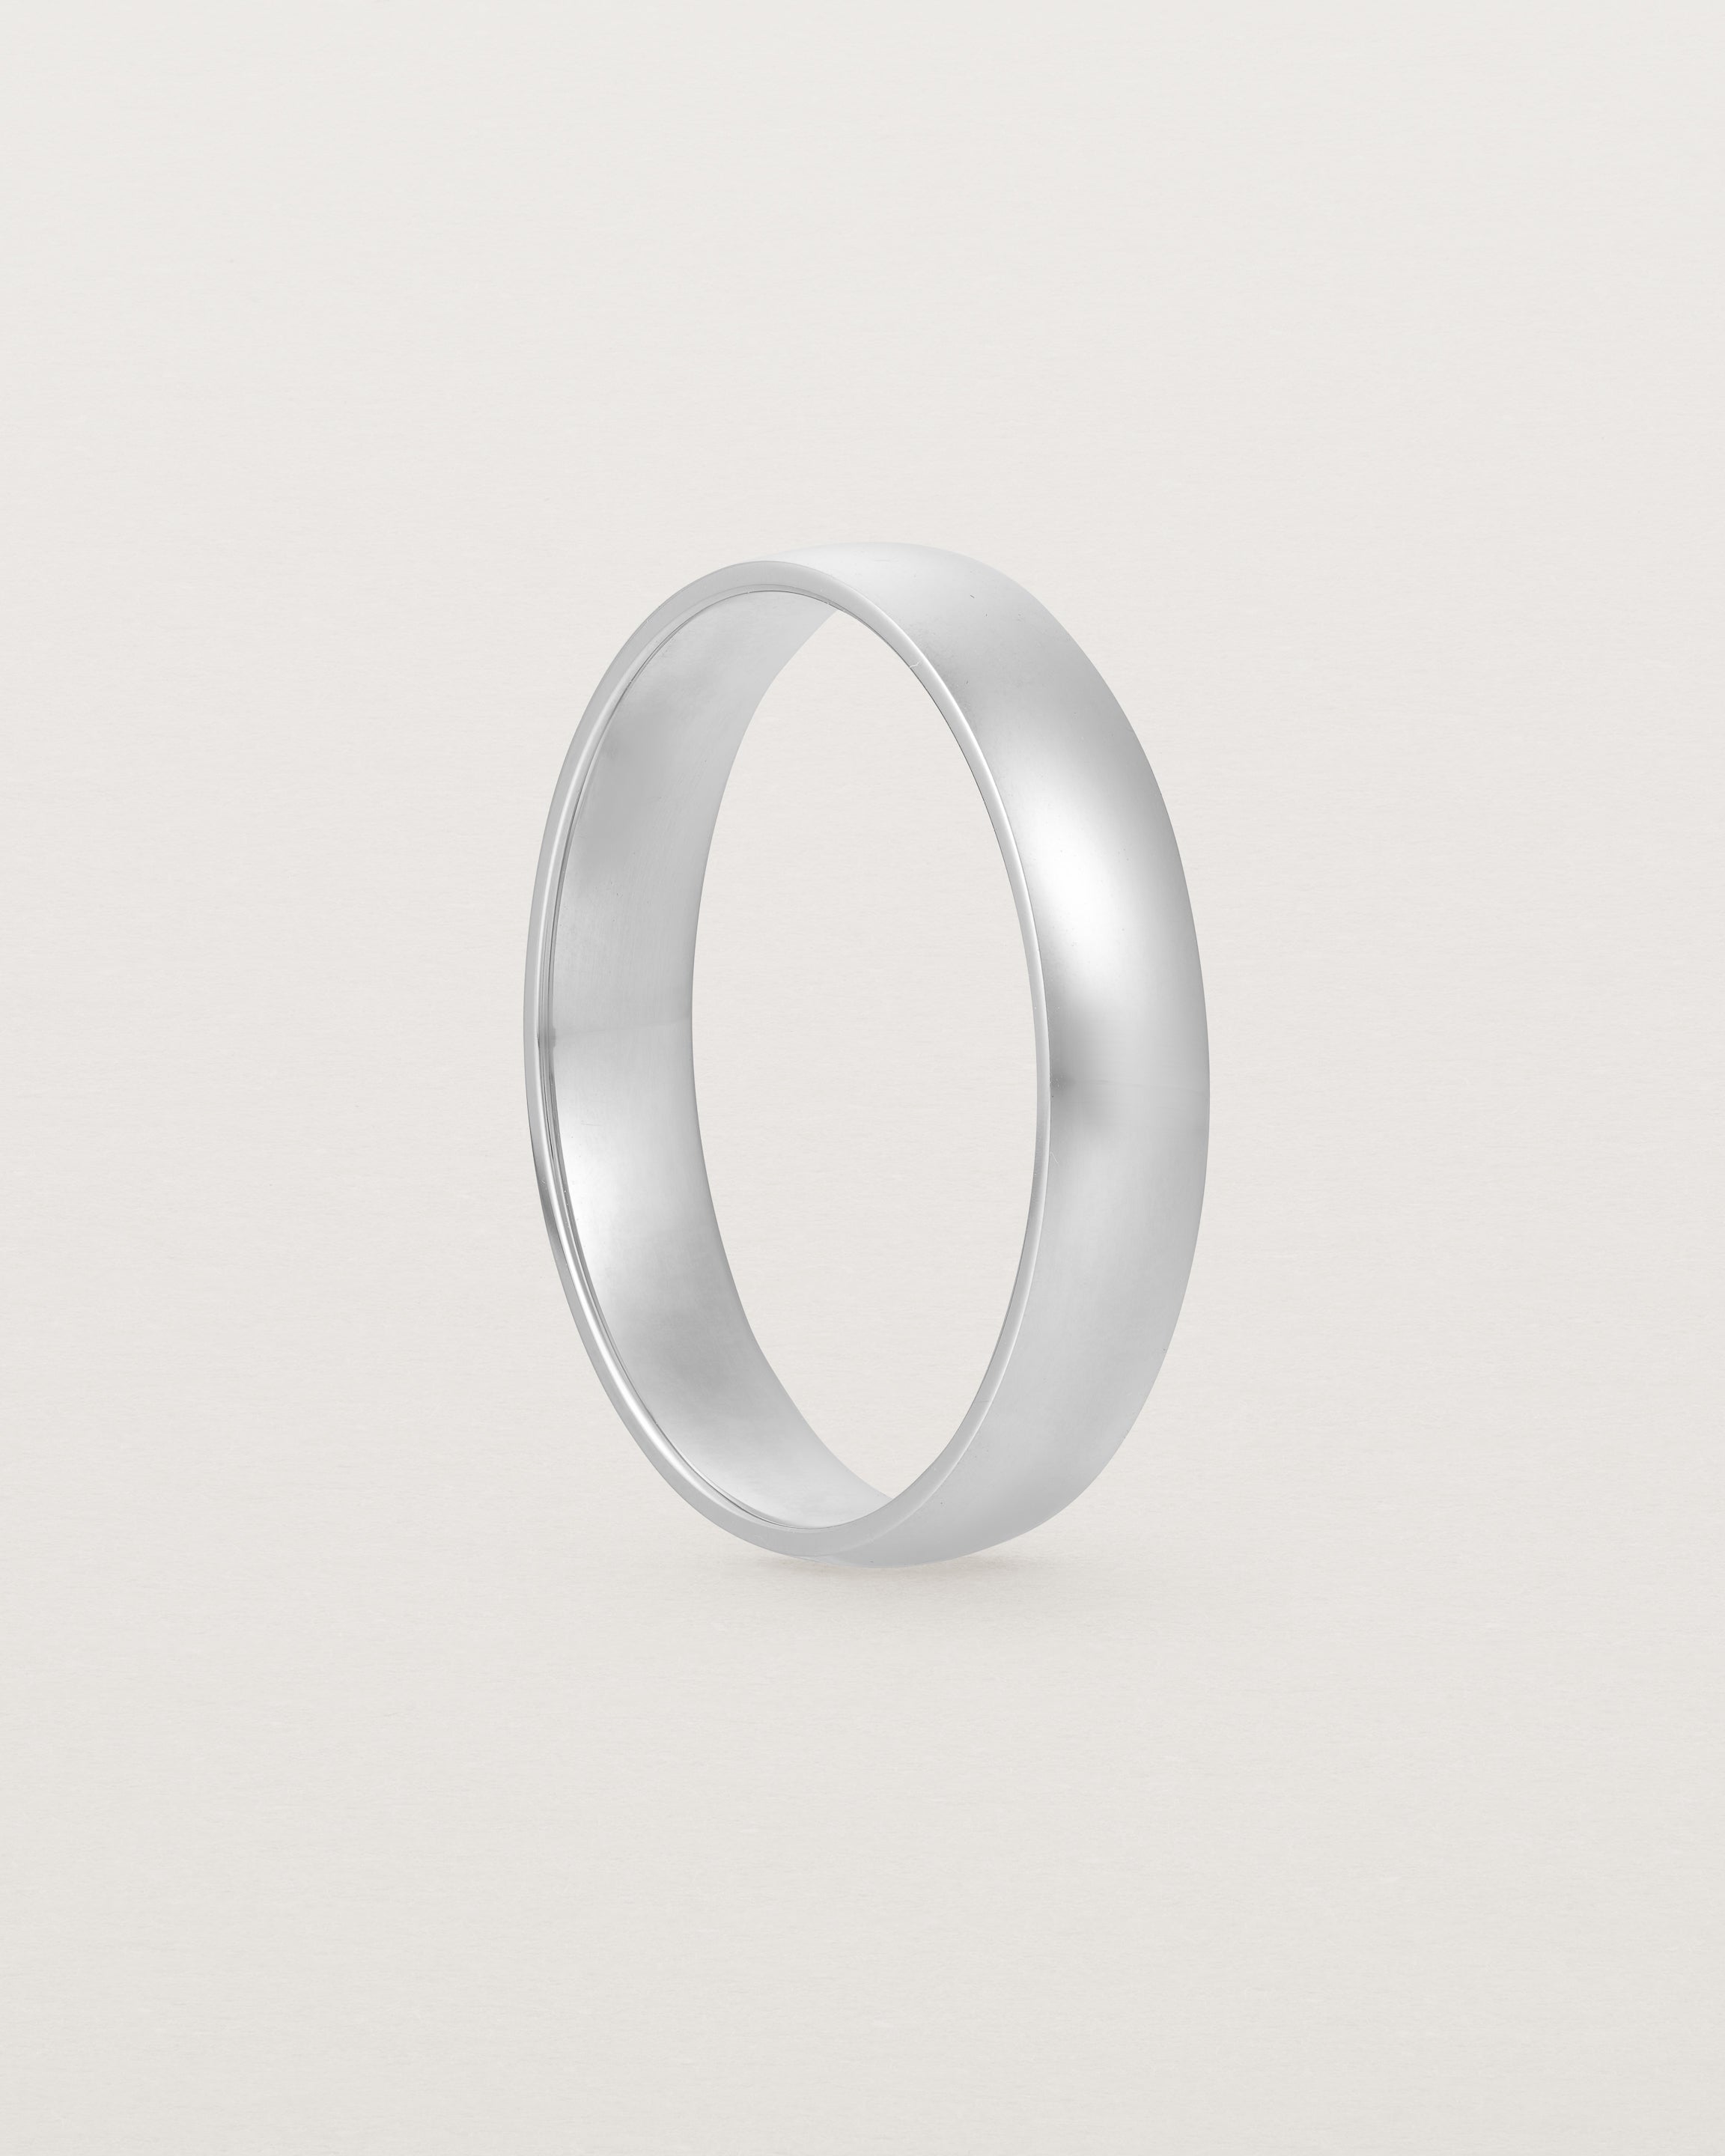 A classic 4mm wedding band crafted in sterling silver